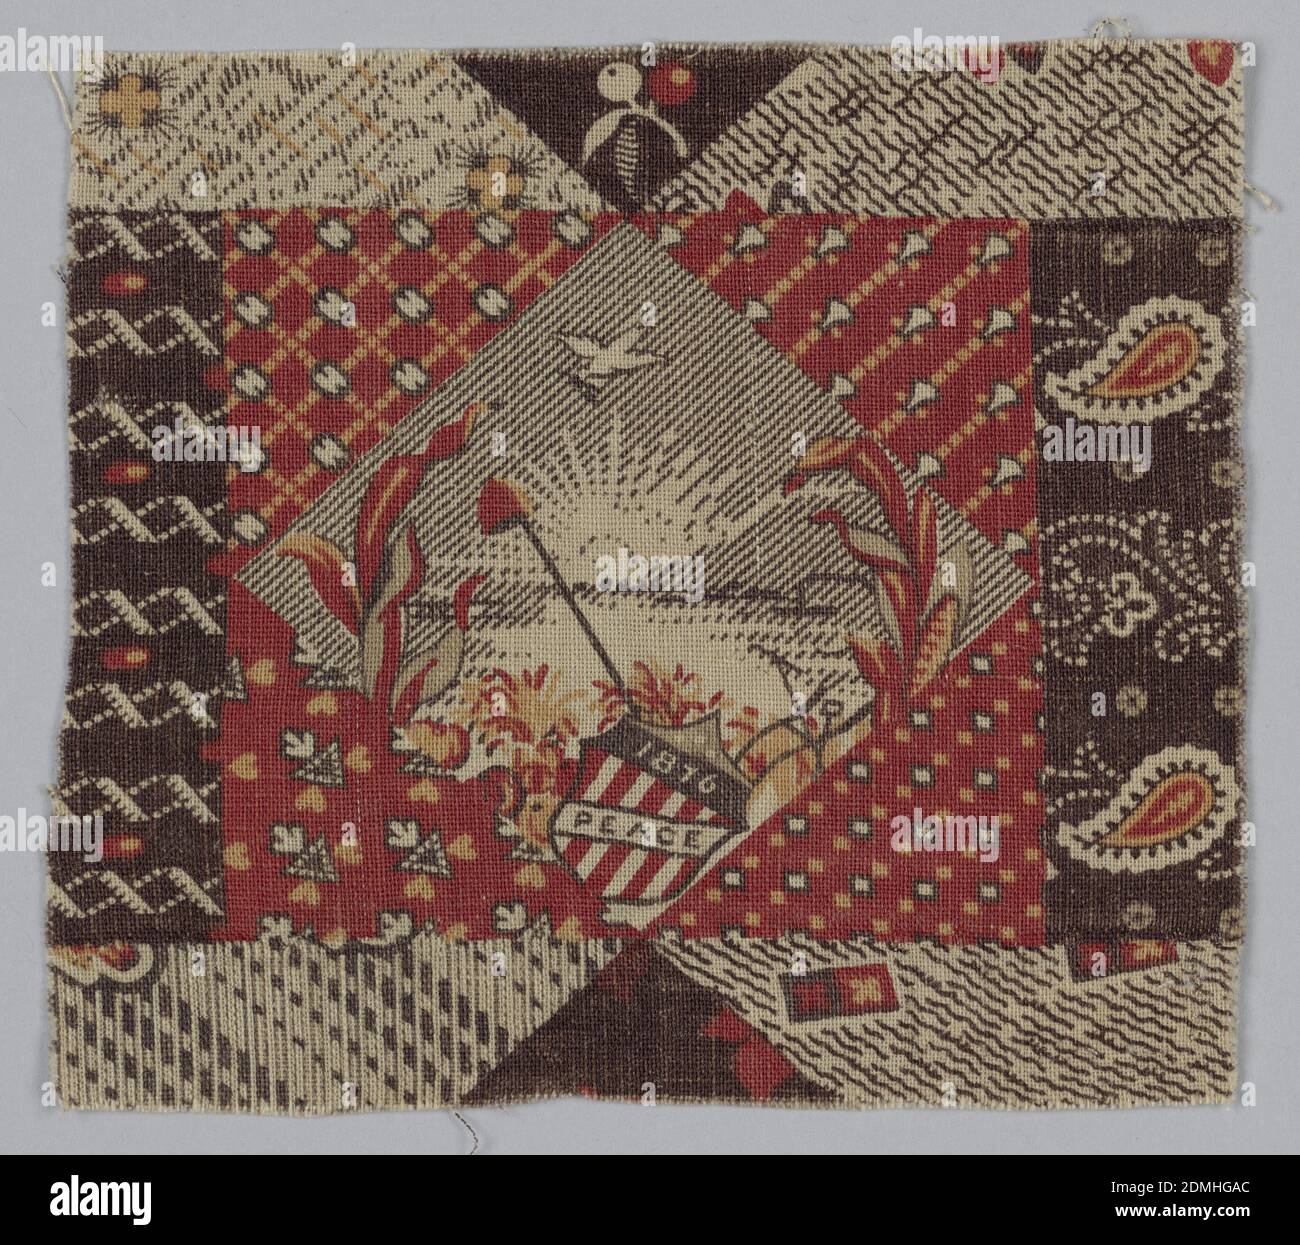 Fragment, Cocheco Print Works, (Dover, NH, USA), Medium: cotton Technique: printed, Small fragment of a centennial print in shades of brown, red and dark yellow. Diamond shape in center has a shield flag with '1876' and 'Peace.', USA, 1876, printed, dyed & painted textiles, Fragment Stock Photo